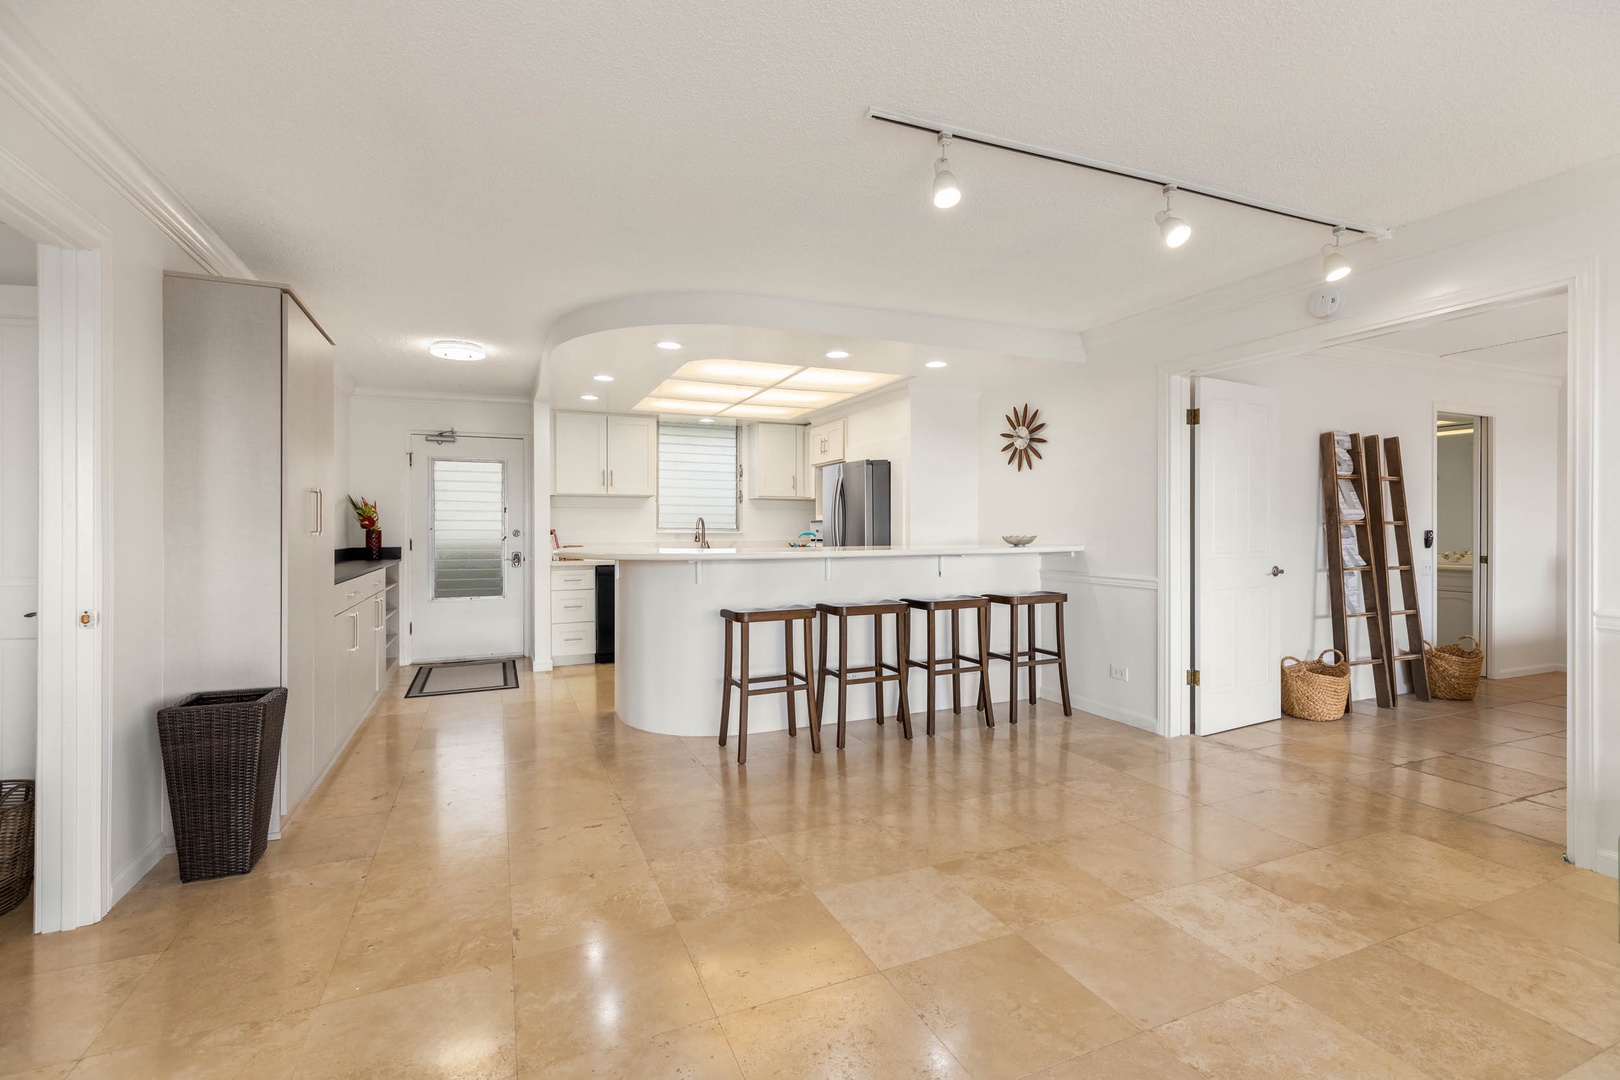 Honolulu Vacation Rentals, Colony Surf Getaway - Modern and spacious kitchen with bar seating – perfect for casual dining or morning coffee in comfort.